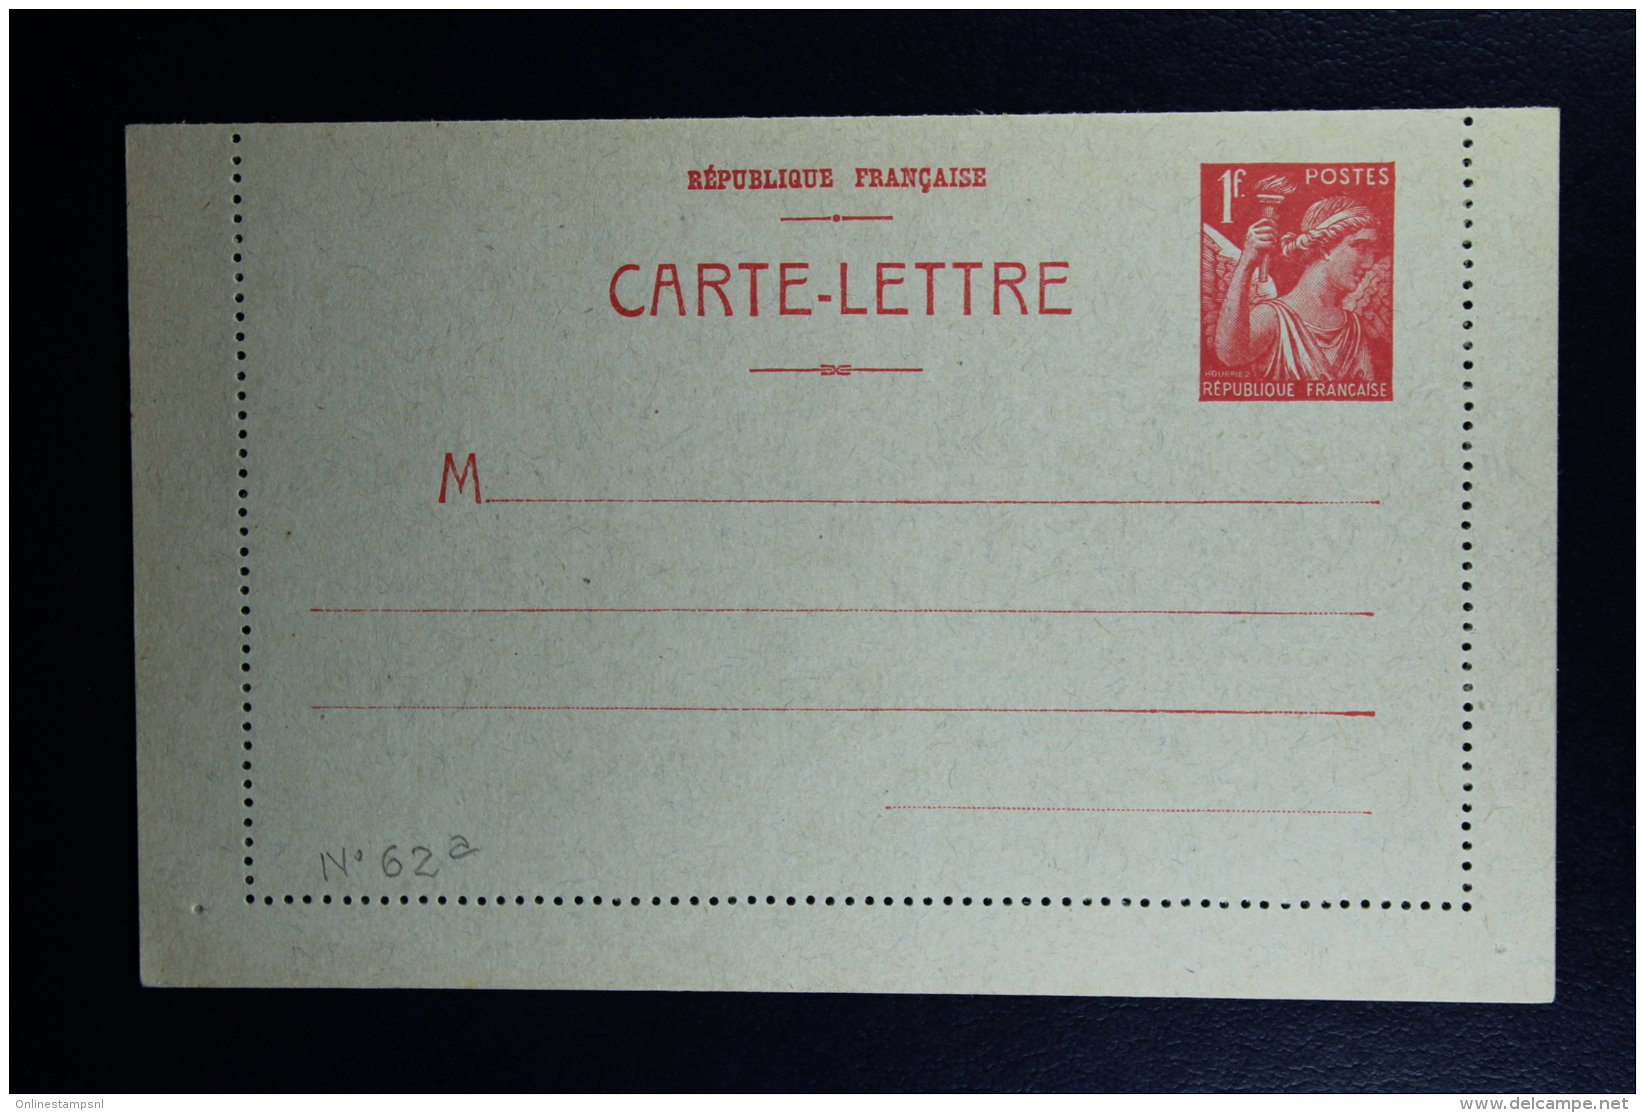 France: Carte-Lettre  Iris  1F  Type B1  Not Used - Kartenbriefe